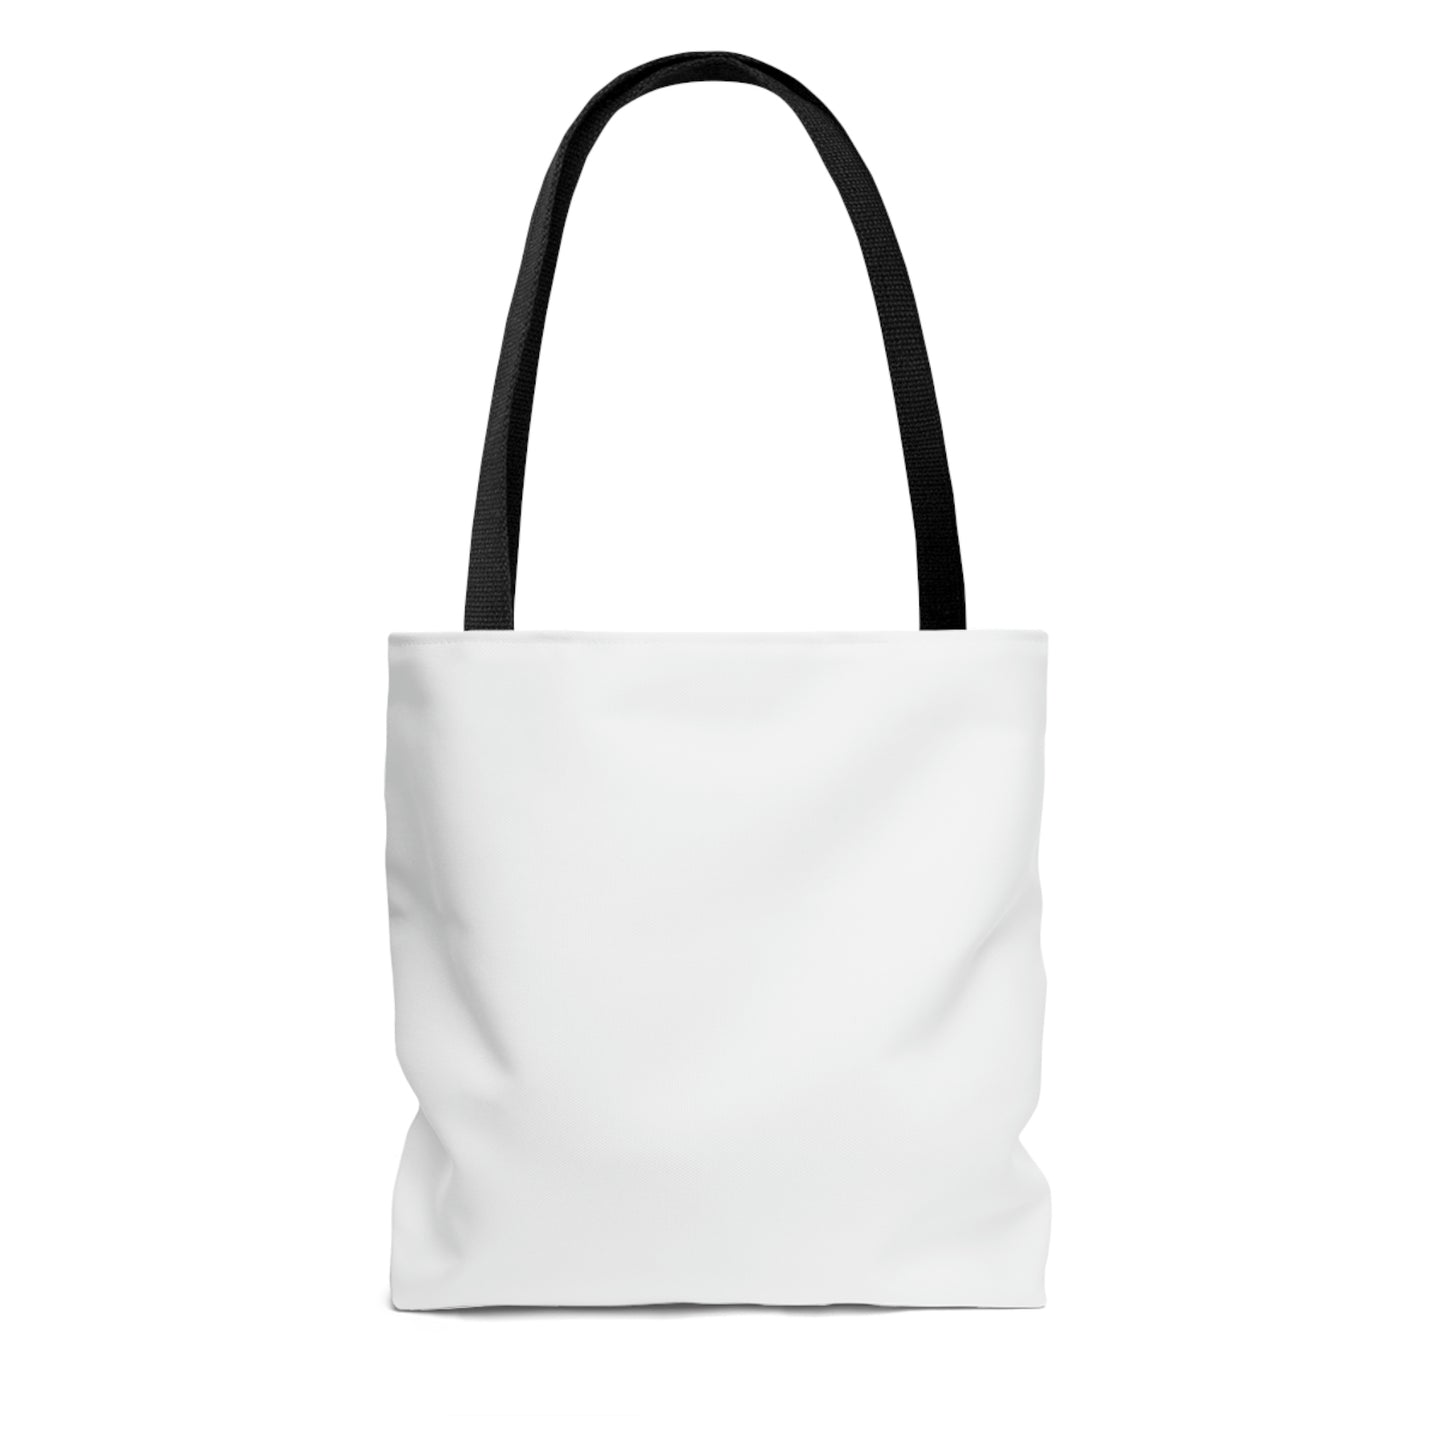 The Bible as Simple as ABC Z AOP Tote Bag